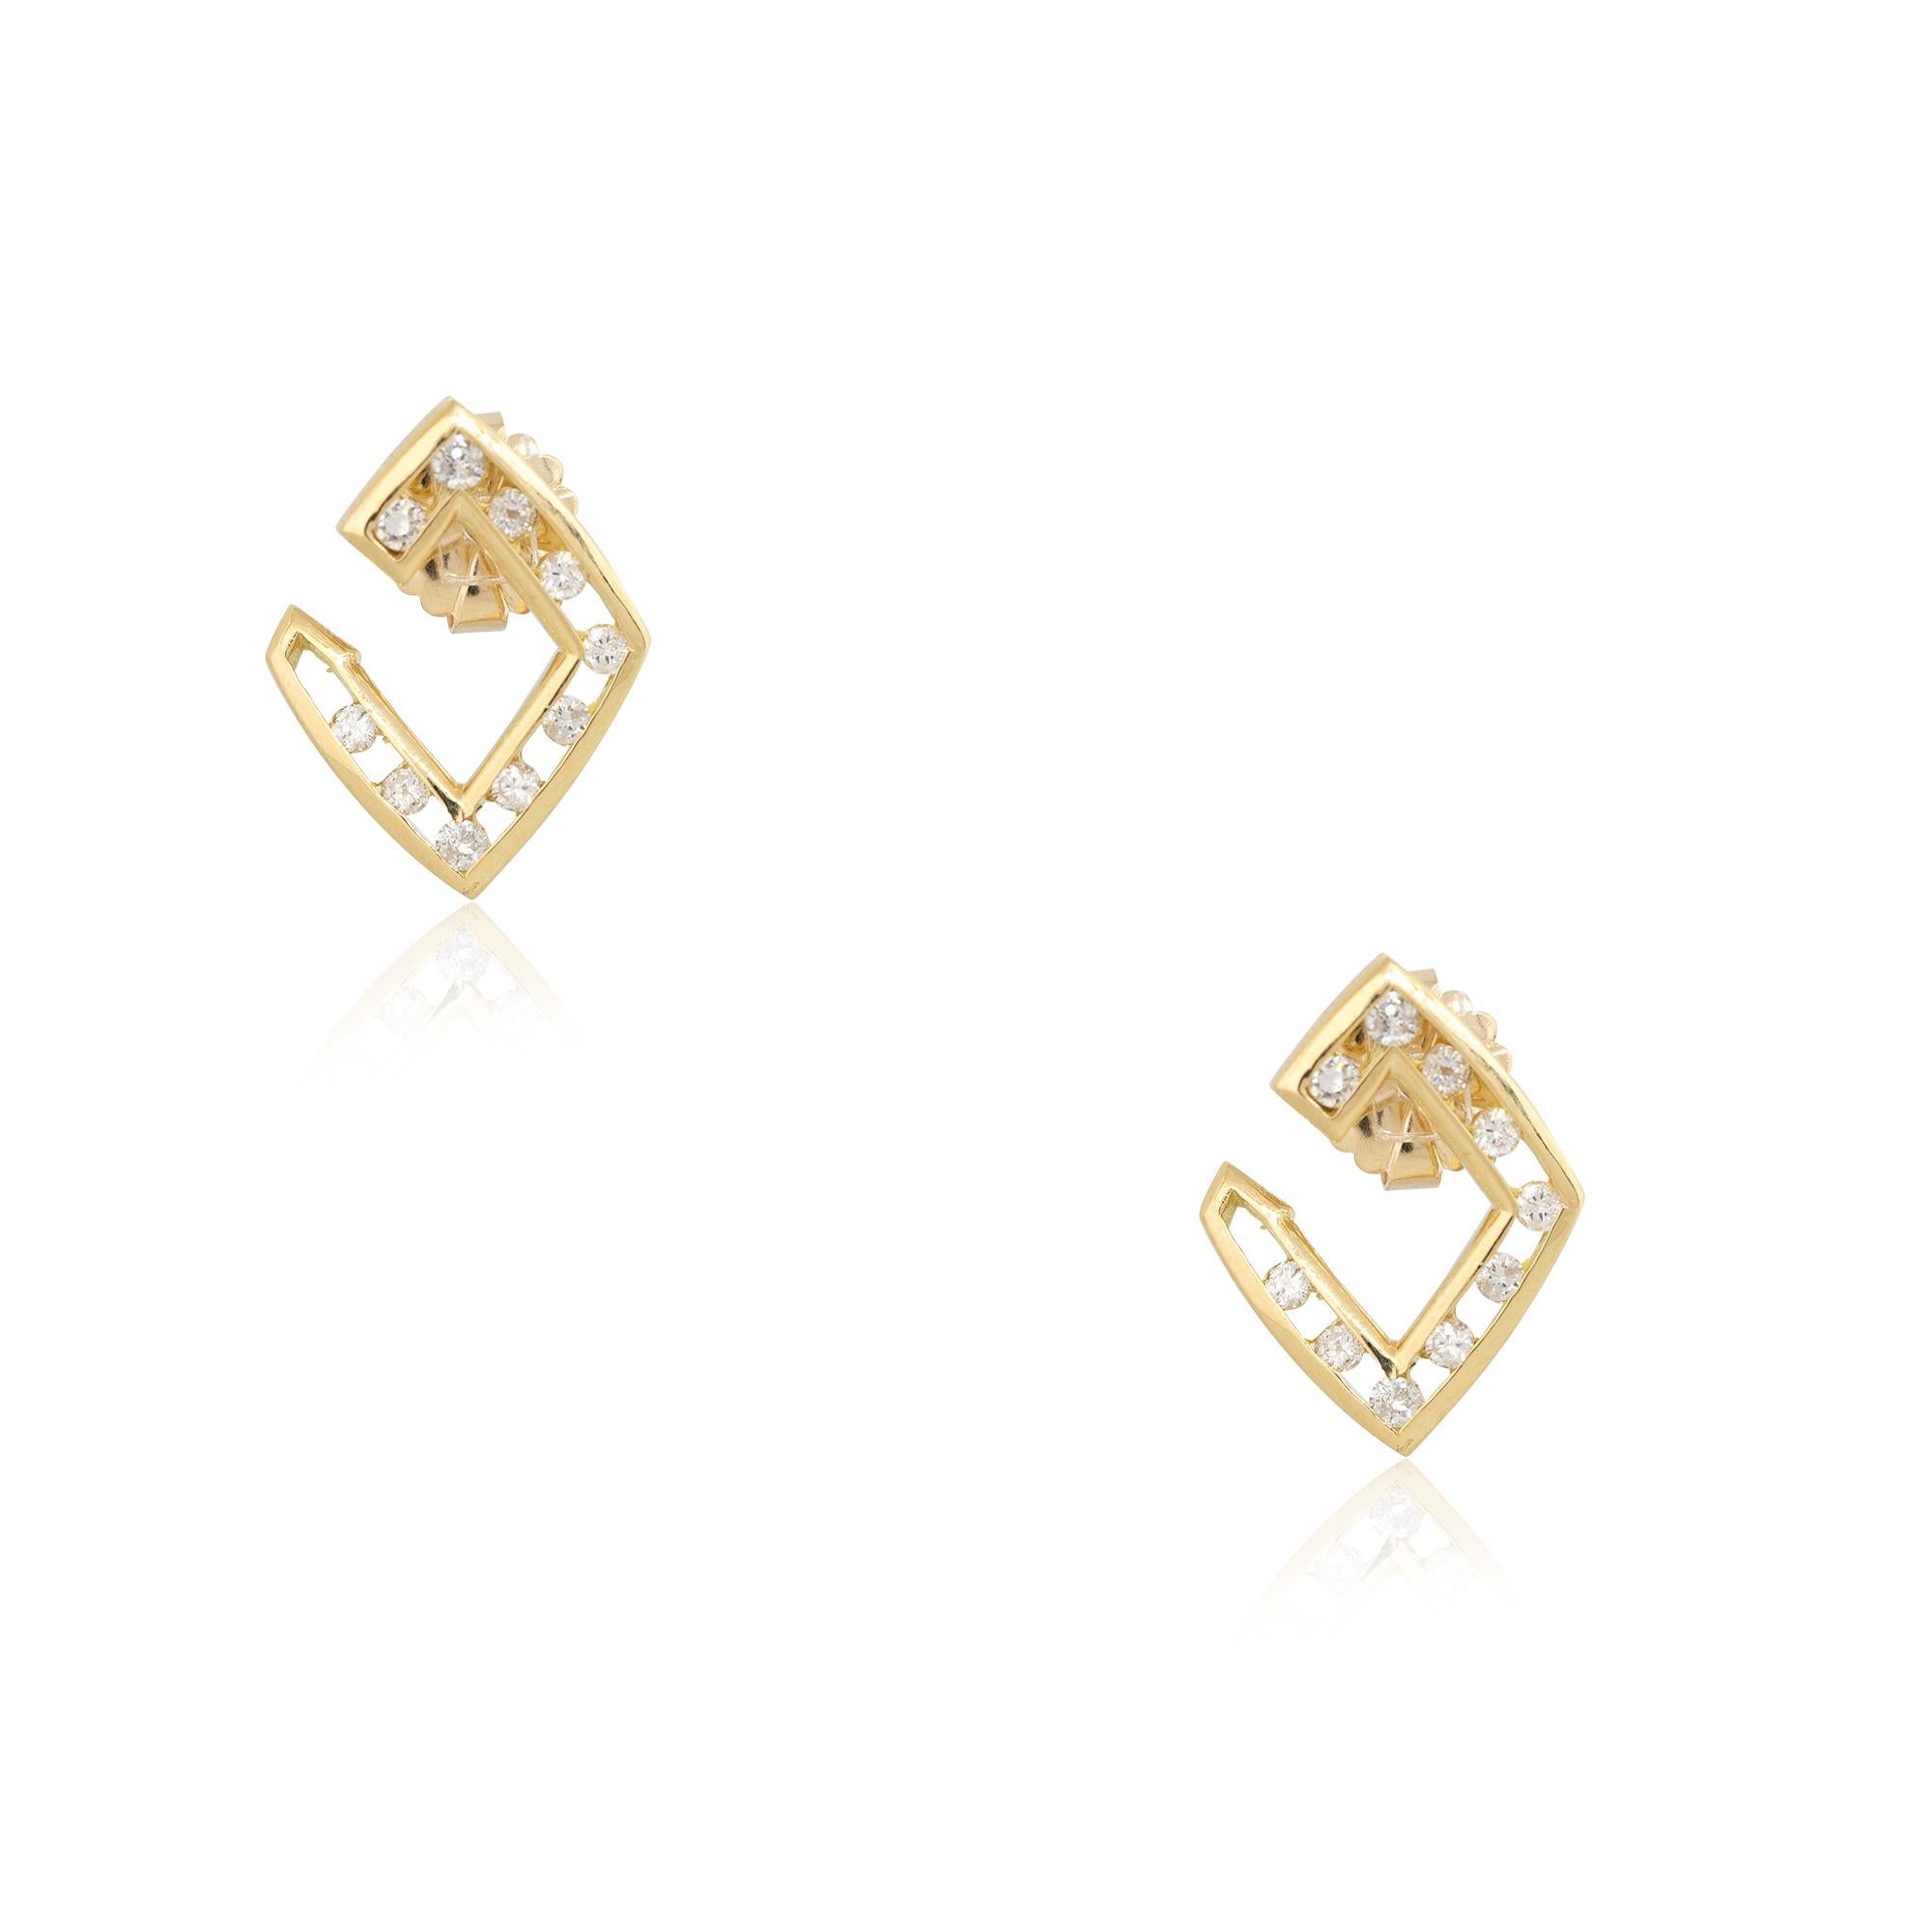 18k Yellow Gold 0.70ct Round Brilliant cut Floating Diamond Earrings
Material: 18k Yellow Gold
Diamond Details: There are approximately 0.70 carats of round brilliant-cut diamonds (20 stones). All diamonds are approximately H/I in color and